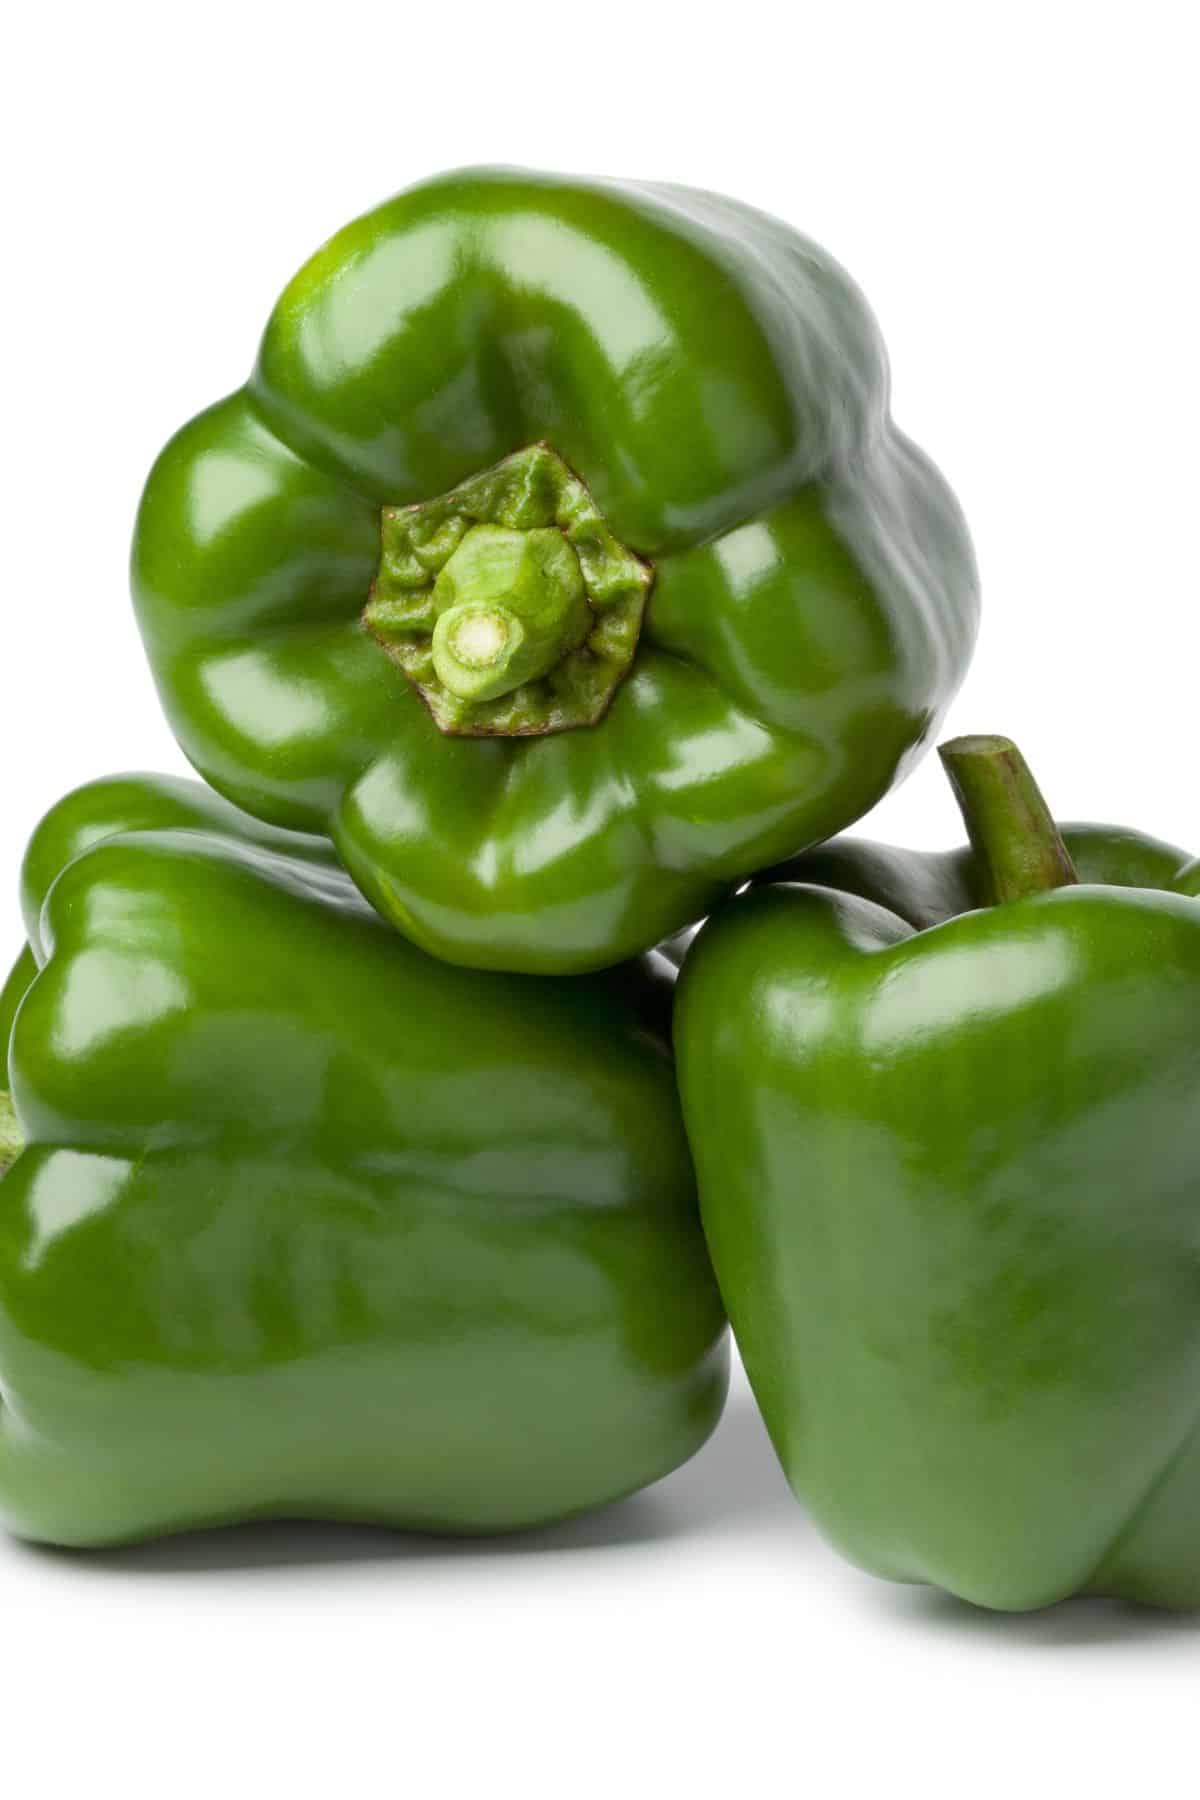 photo of green bell peppers on table.